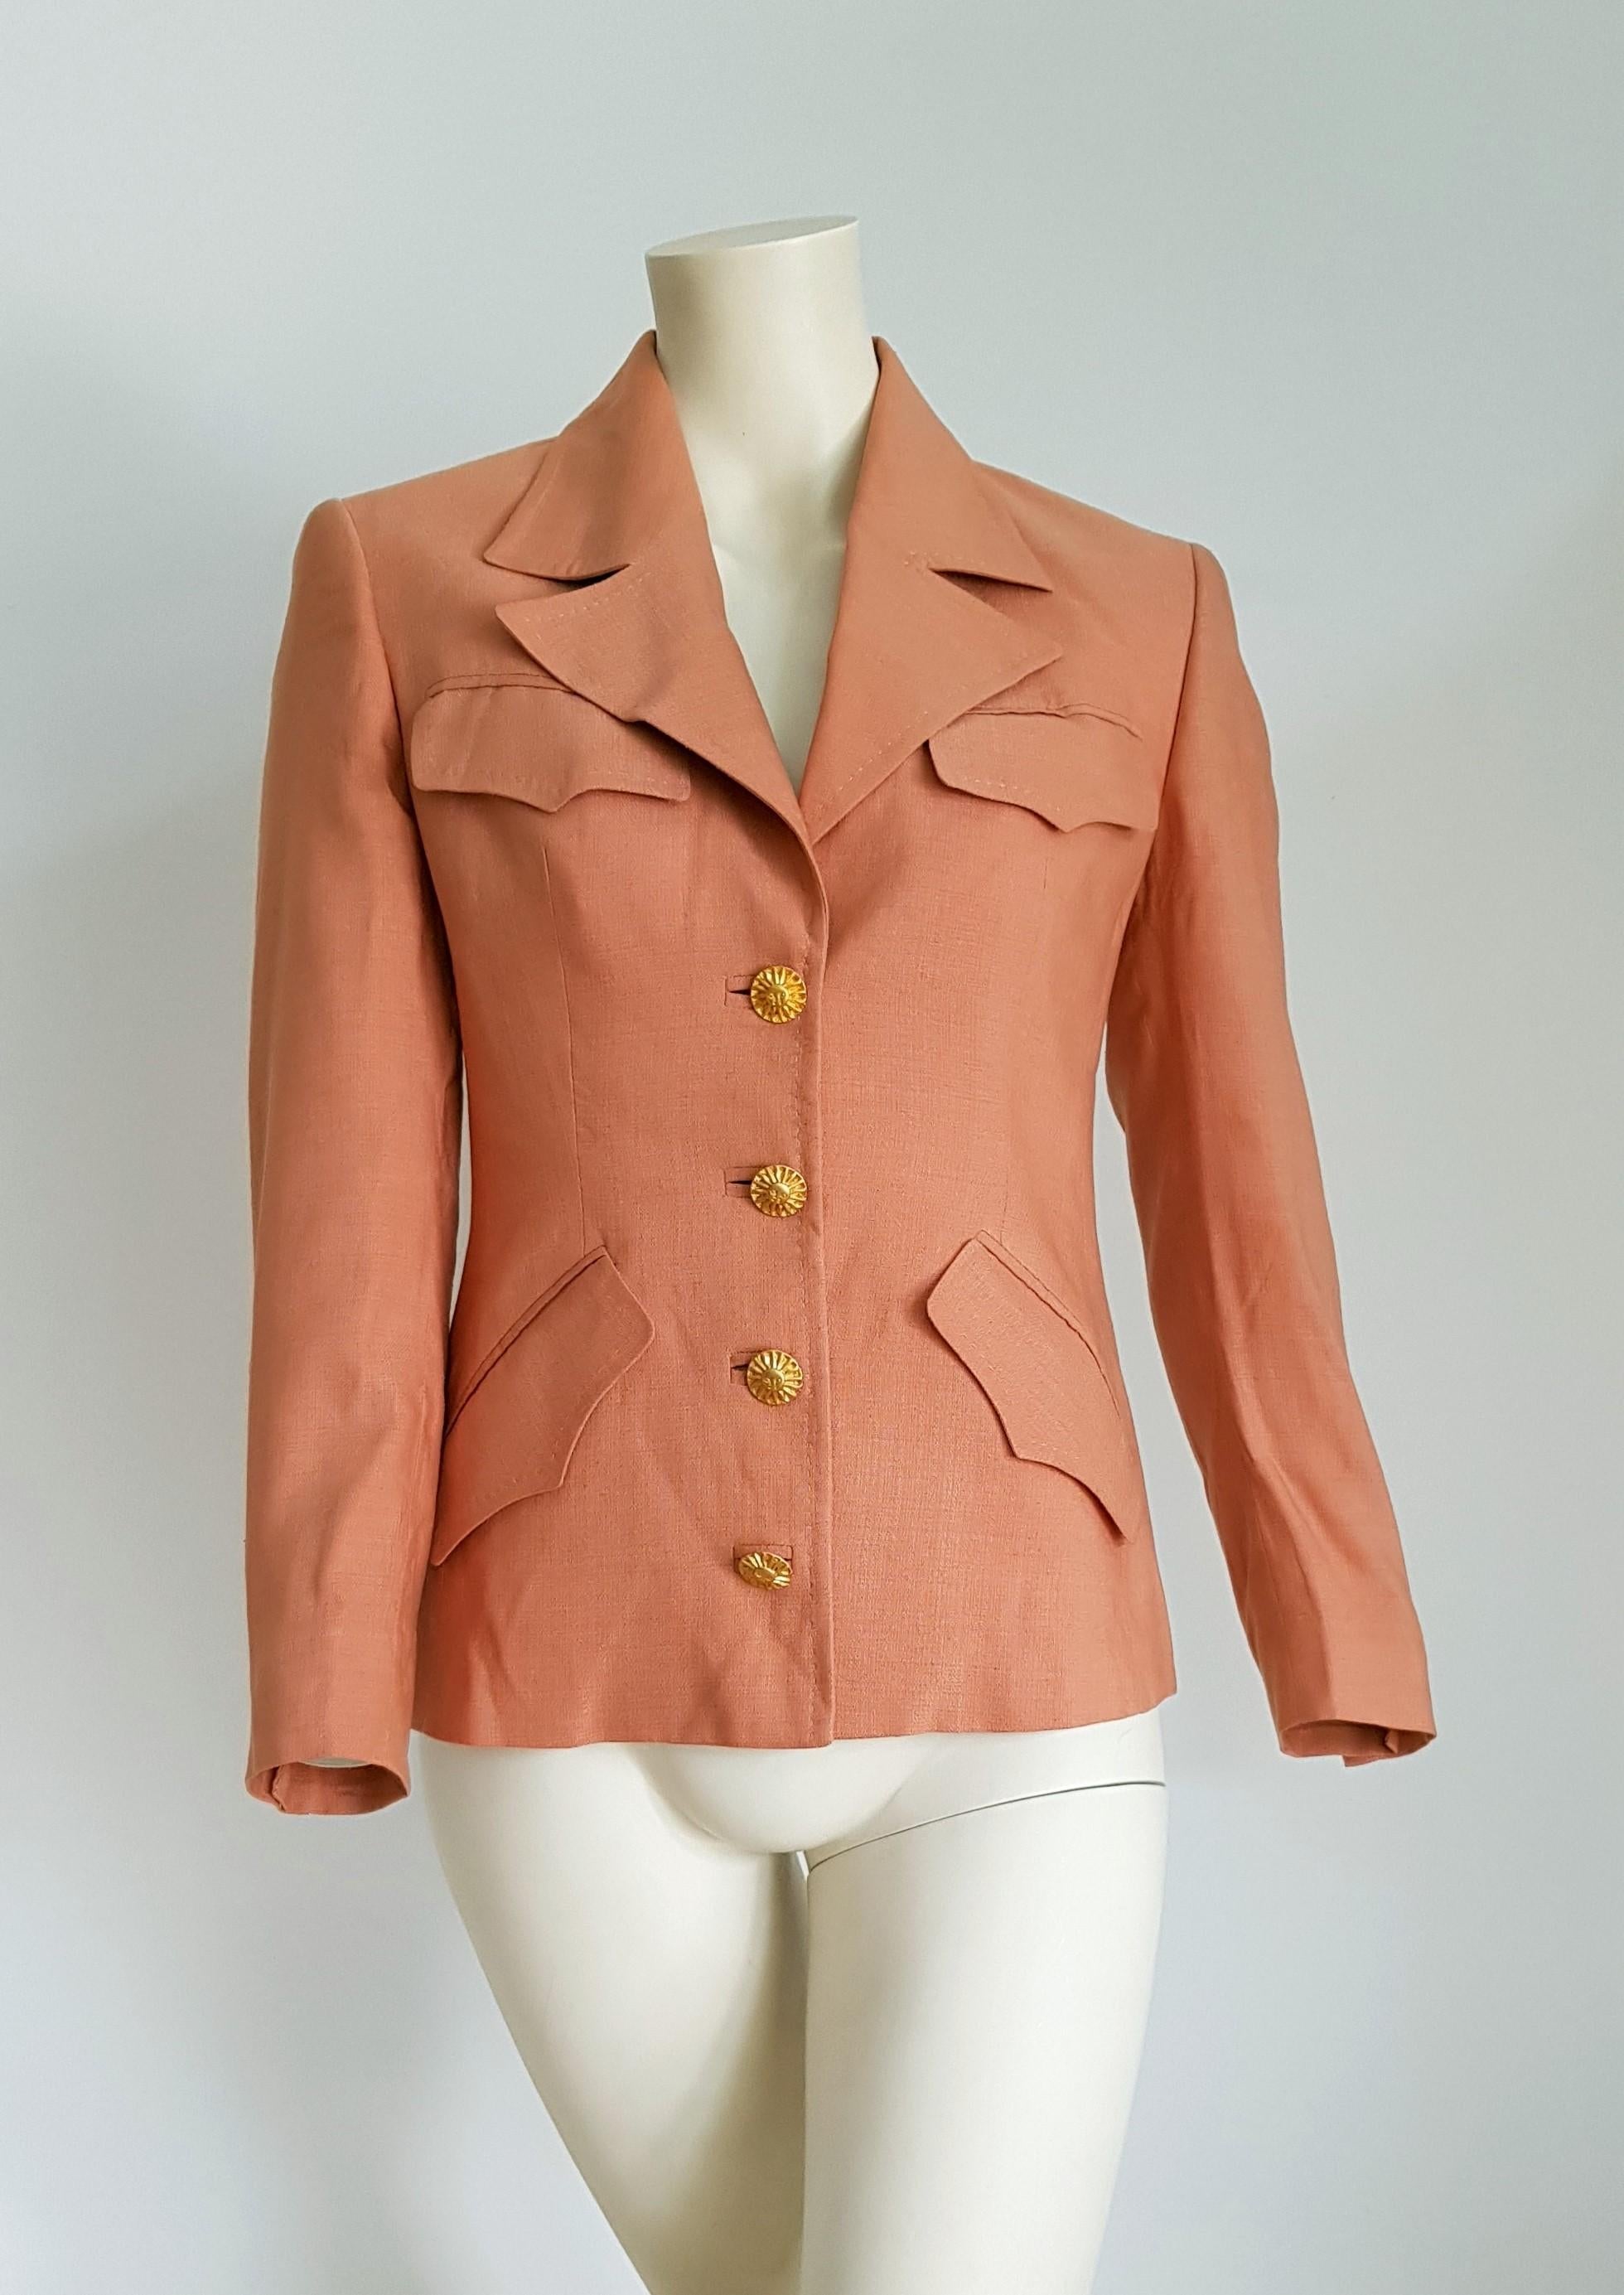 GUCCI burnt pink, drawing of the sun on the buttons, silk jacket - Unworn, New.

SIZE: equivalent to about Small / Medium, please review approx measurements as follows in cm: lenght 66, chest underarm to underarm 50, bust circumference 88, shoulder